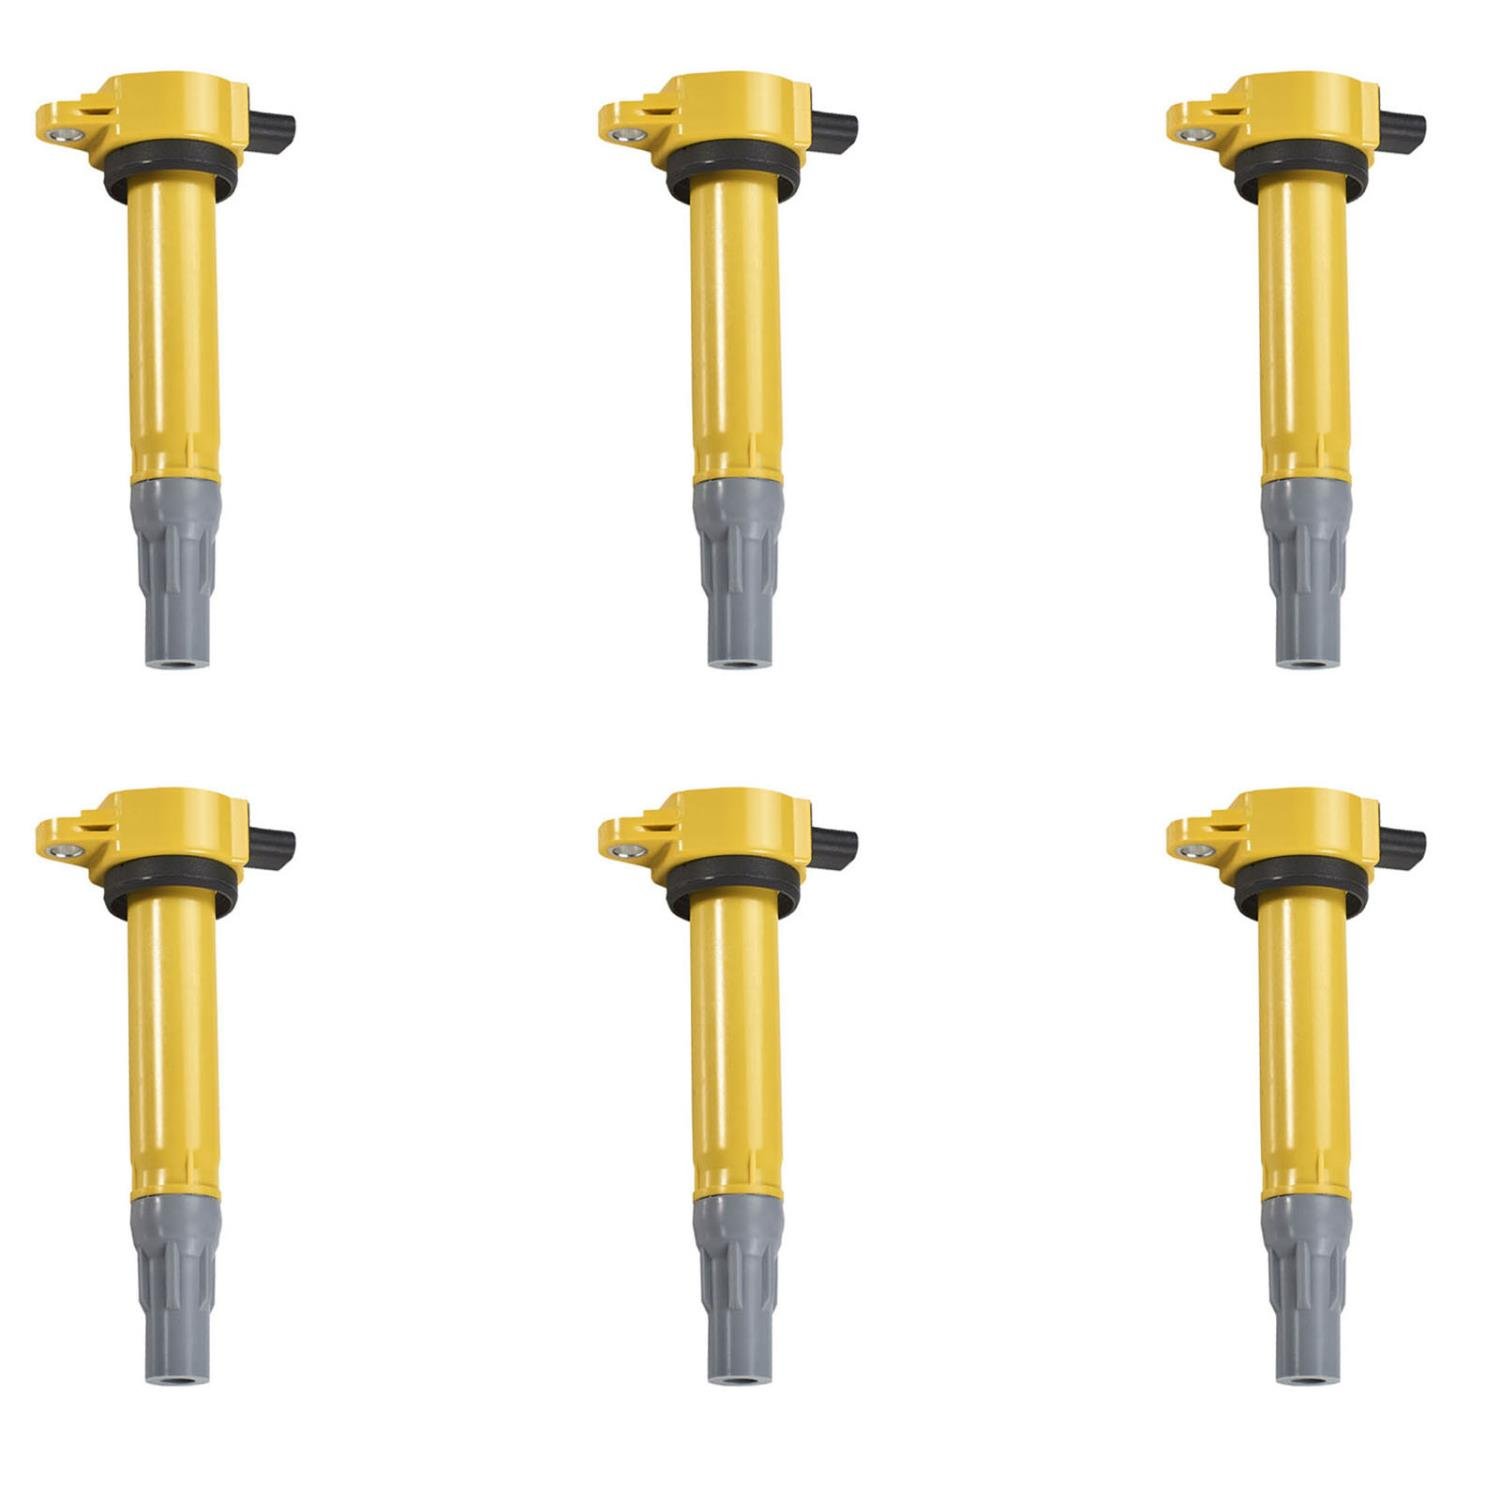 High-Performance Ignition Coils for 2006-2010 Chrysler/Dodge 4.0L/2.7L/3.5L [Yellow]